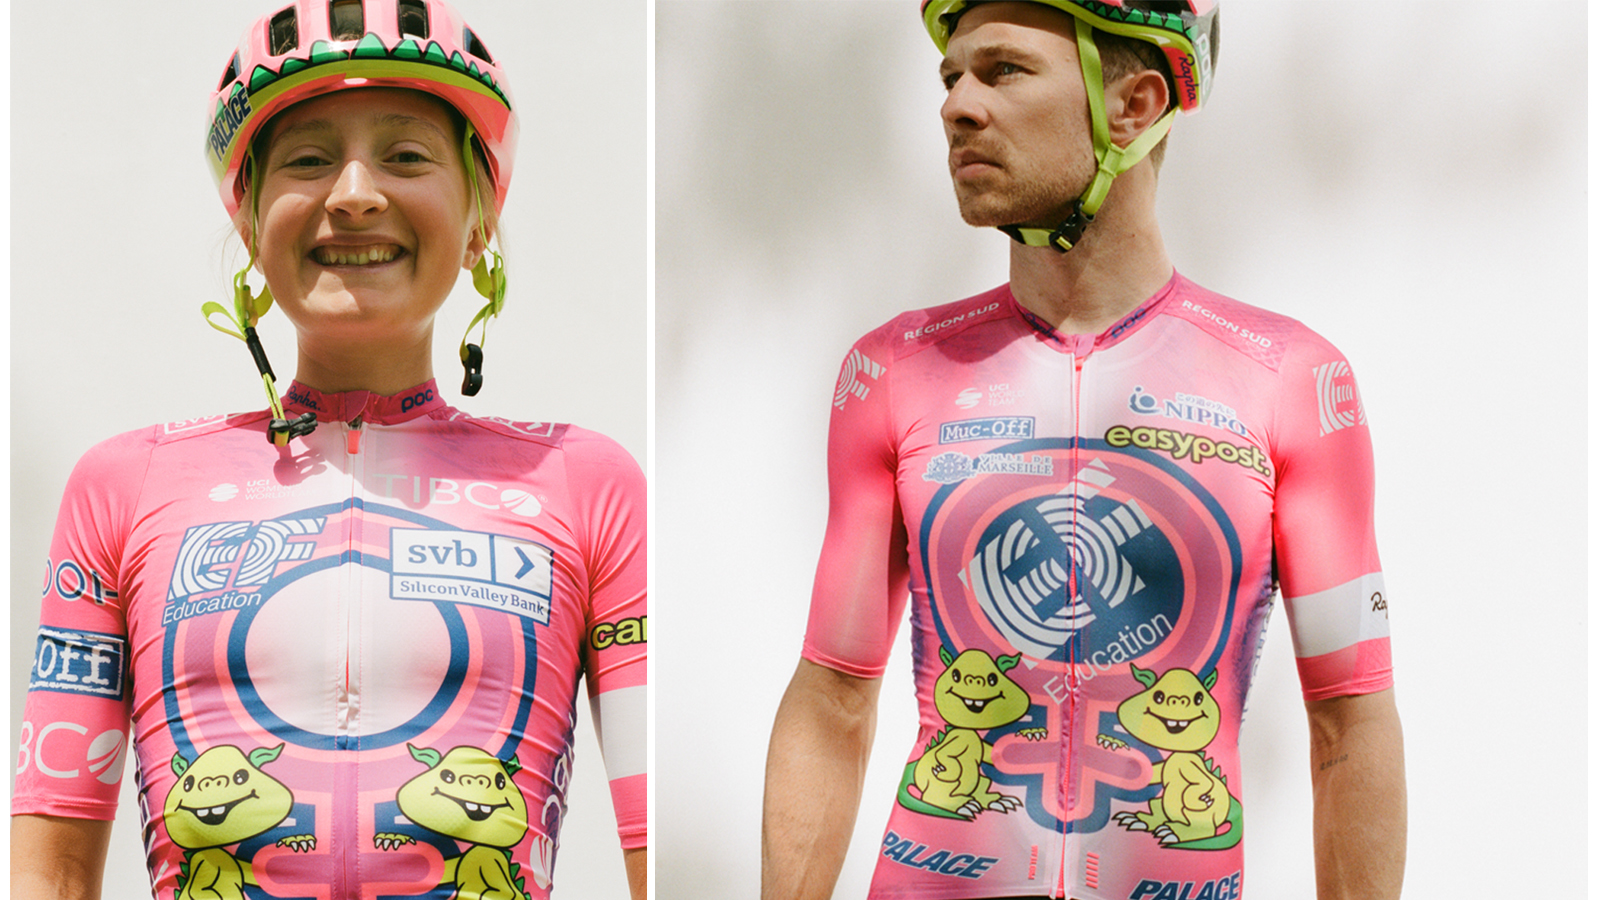 From the Tour de France to Rapha, How Cycling Jerseys Became Seriously  Collectable - WSJ